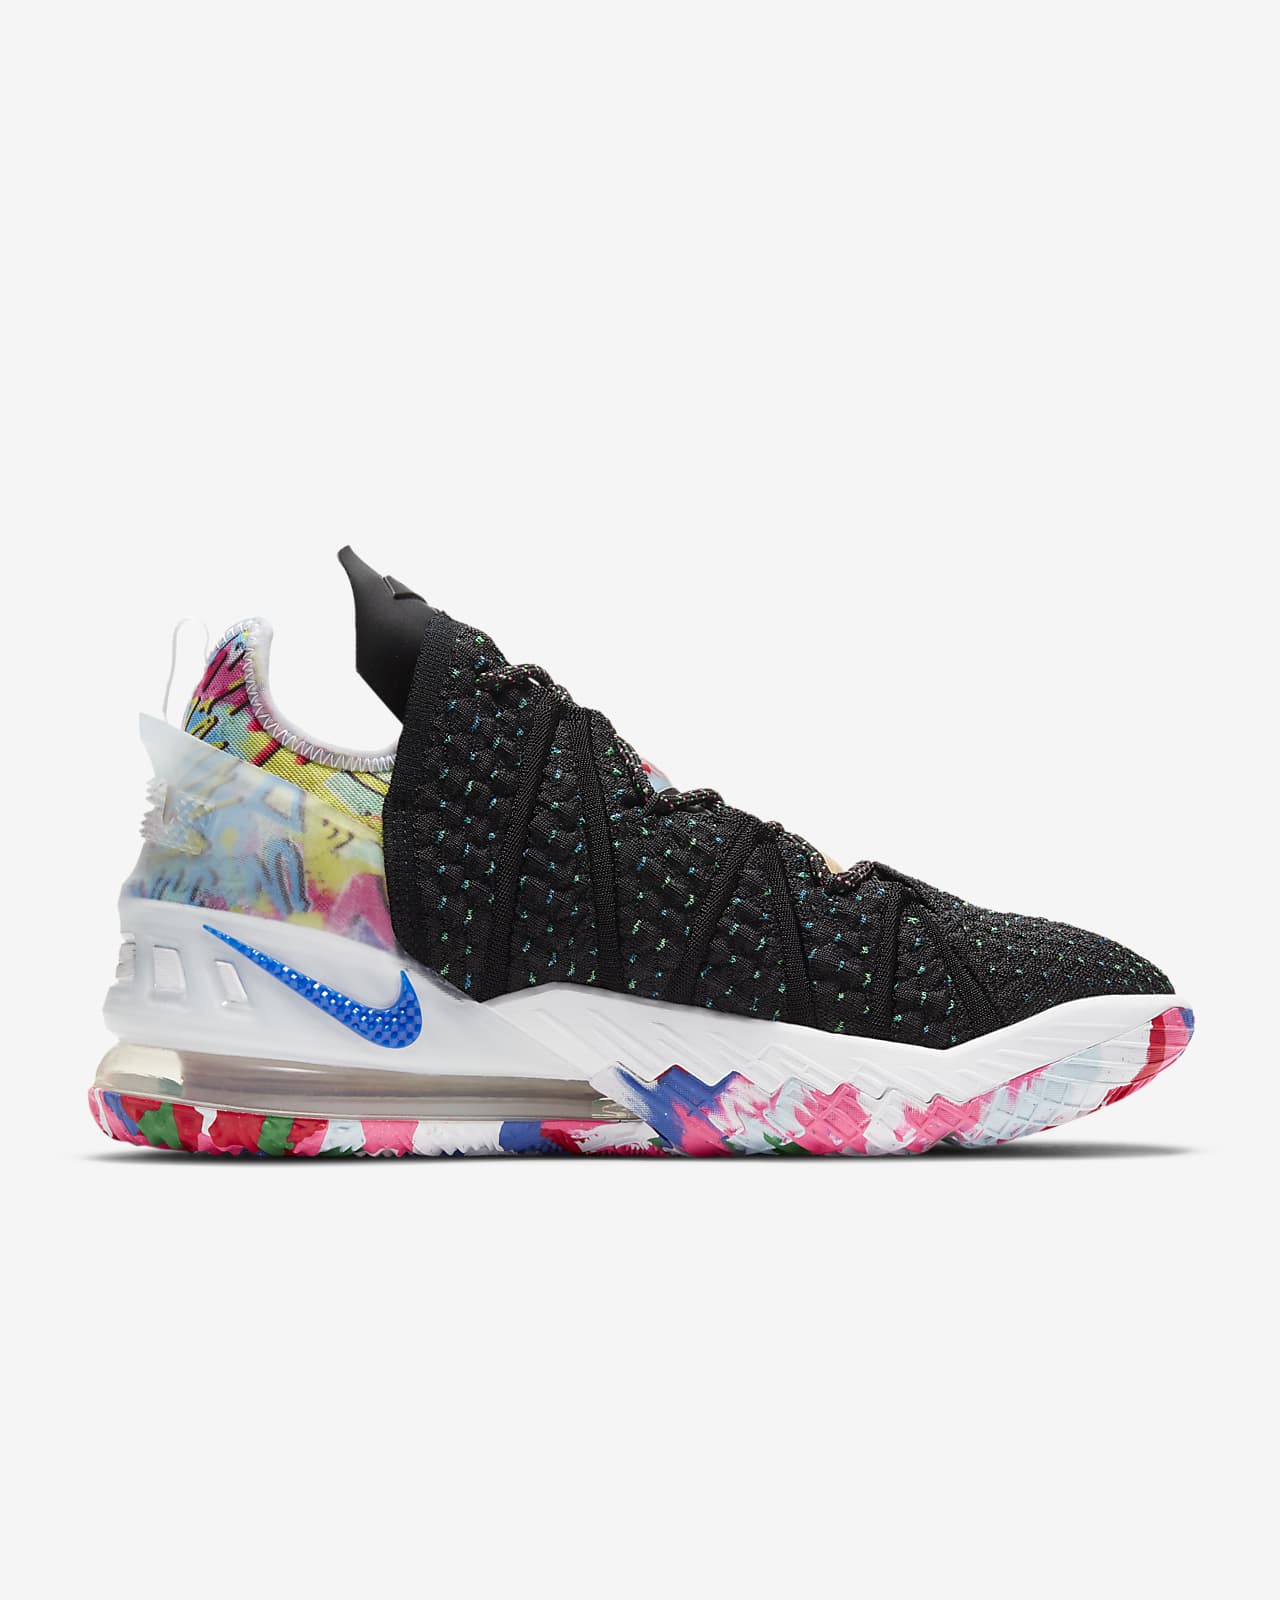 lebron 18s for sale